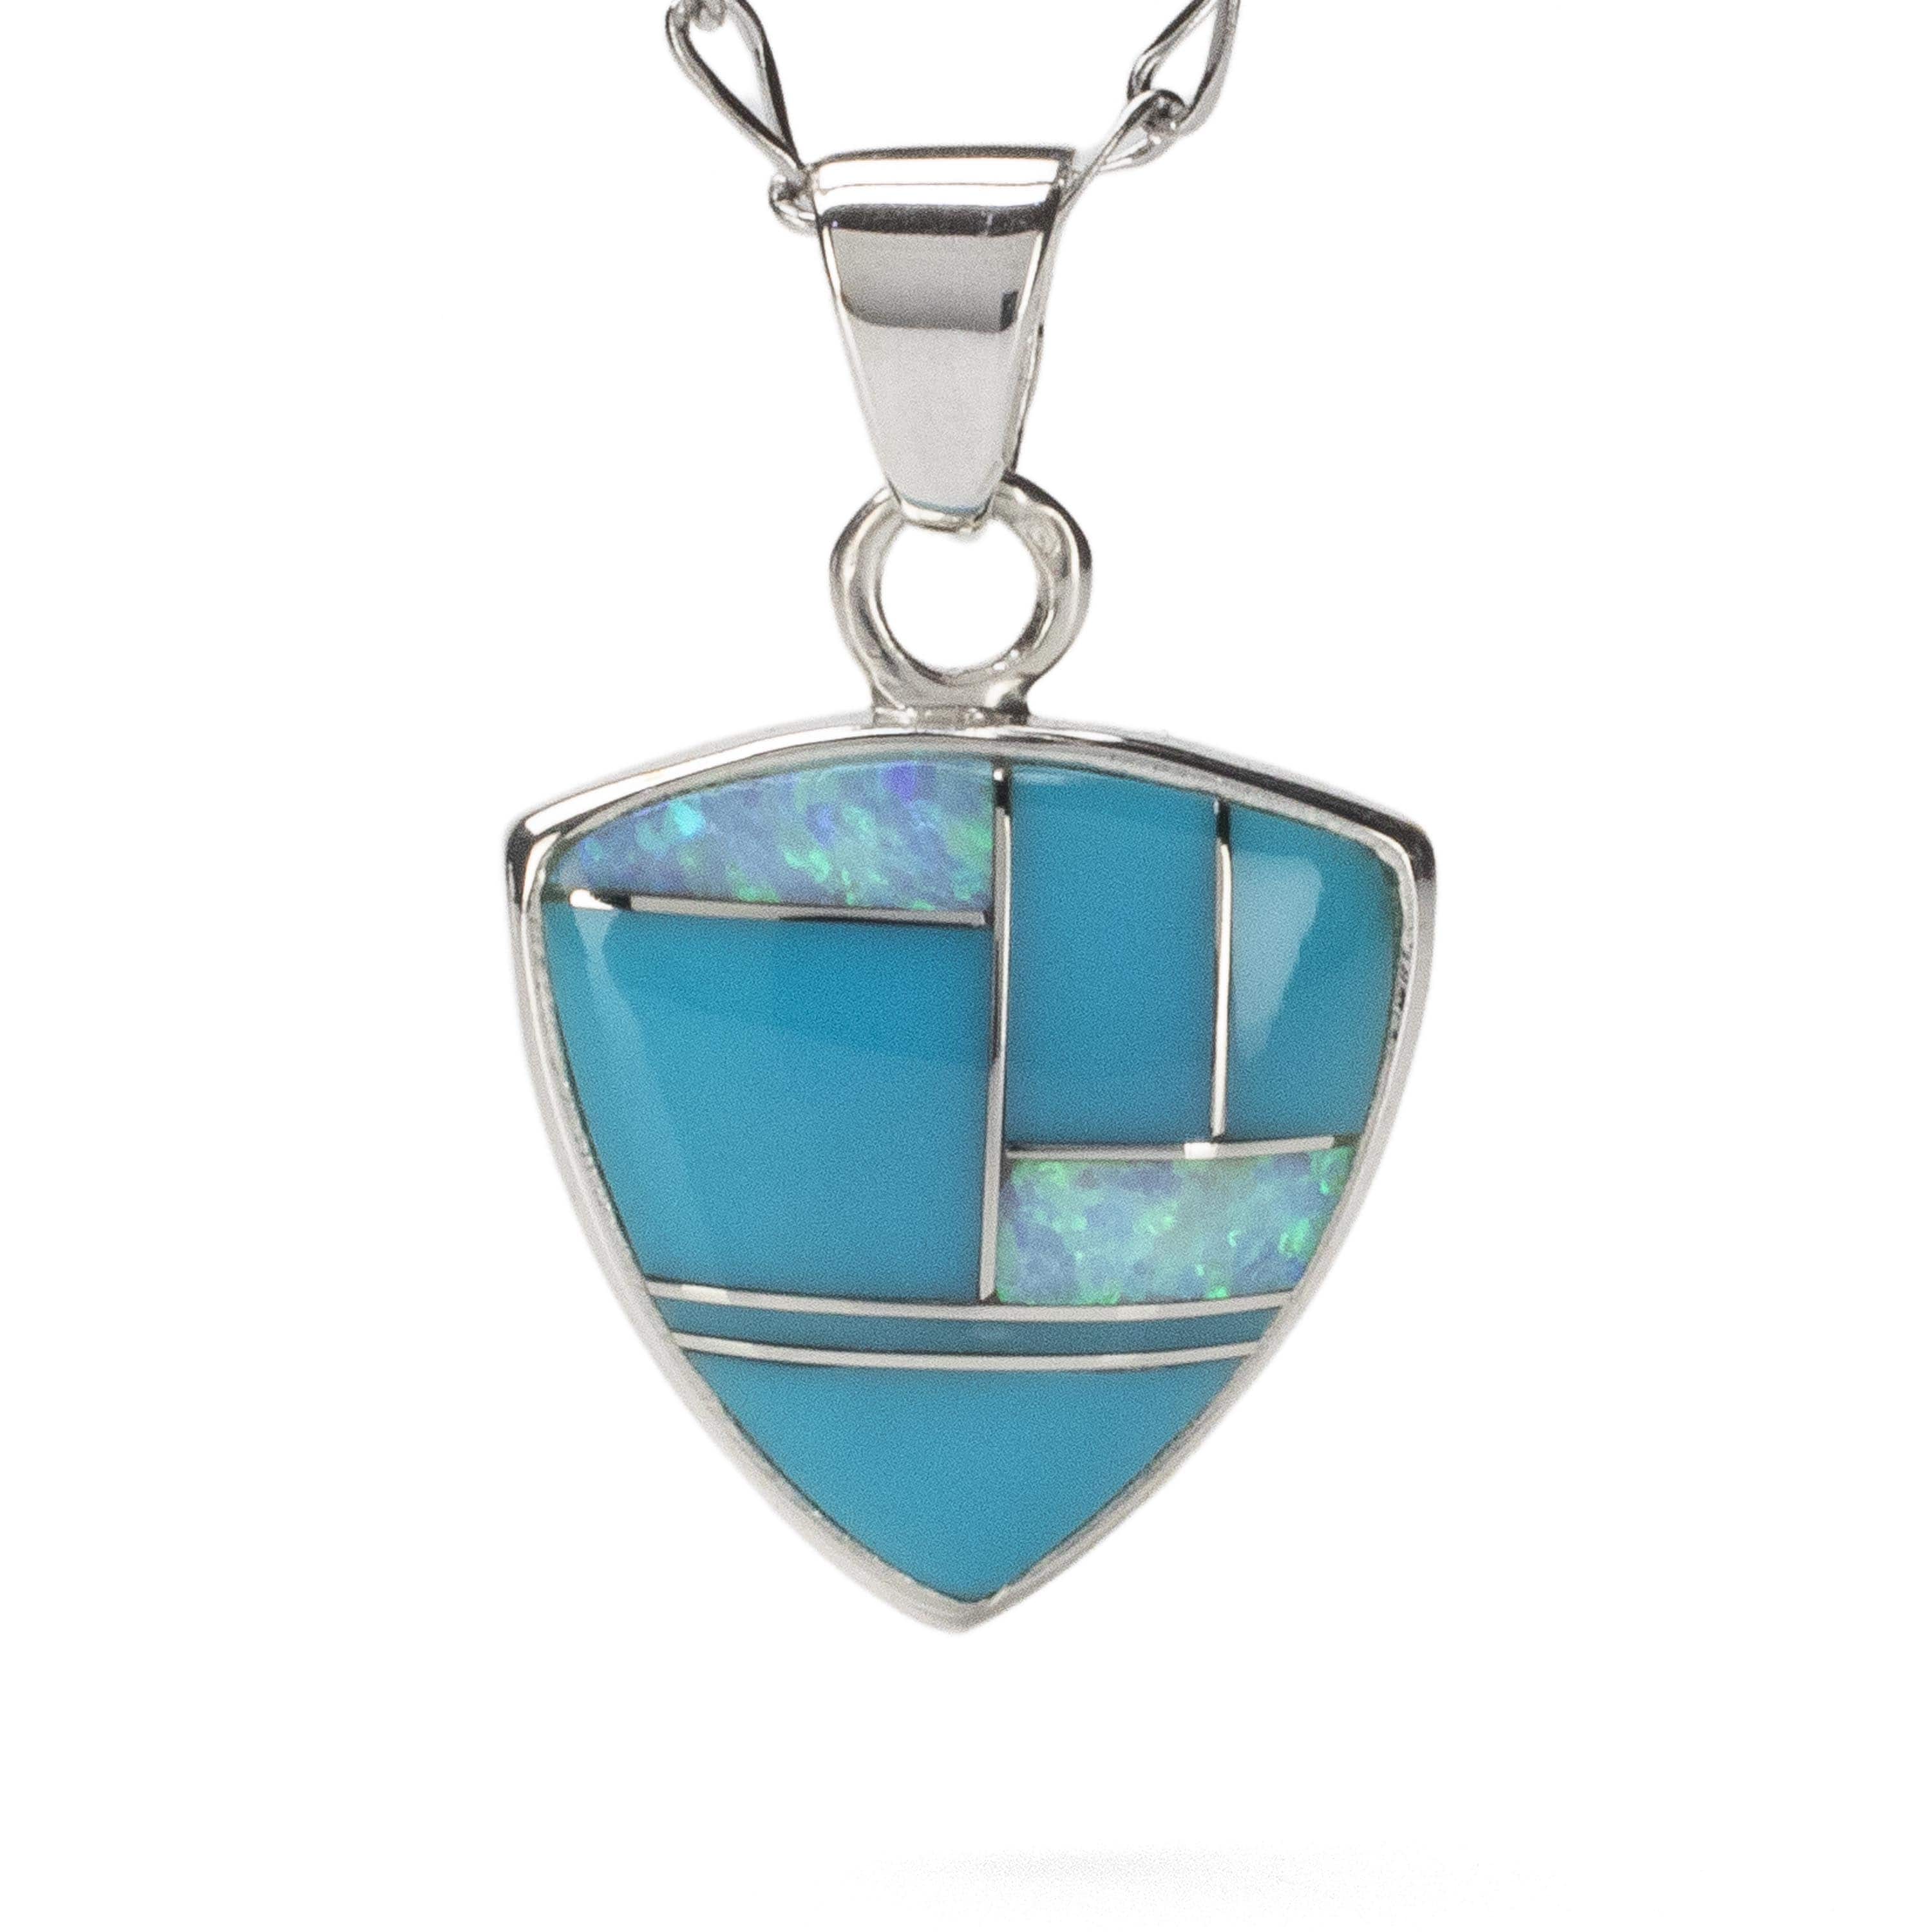 Kalifano Southwest Silver Jewelry Turquoise Shield Handmade with Sterling Silver Pendant and Opal Accent NMN.2242.TQ